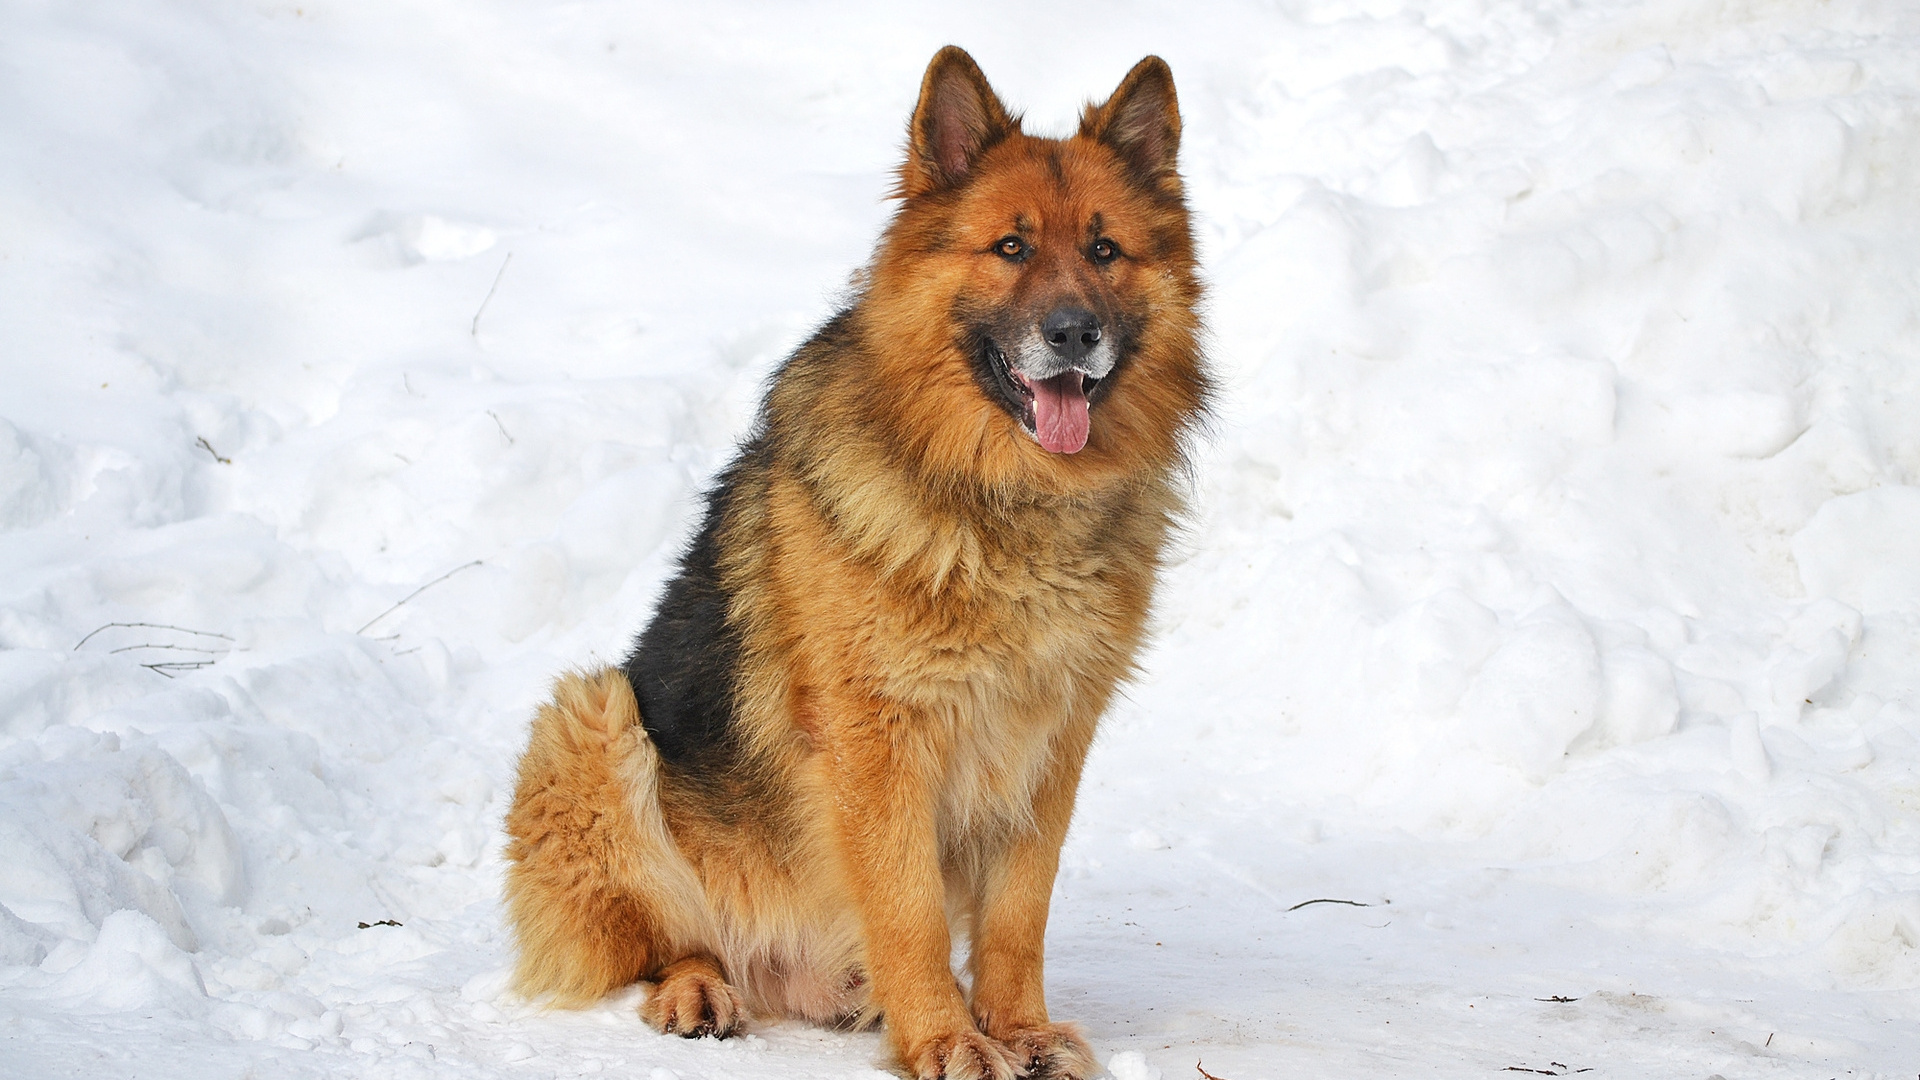 Brown and Black German Shepherd on Snow Covered Ground. Wallpaper in 1920x1080 Resolution